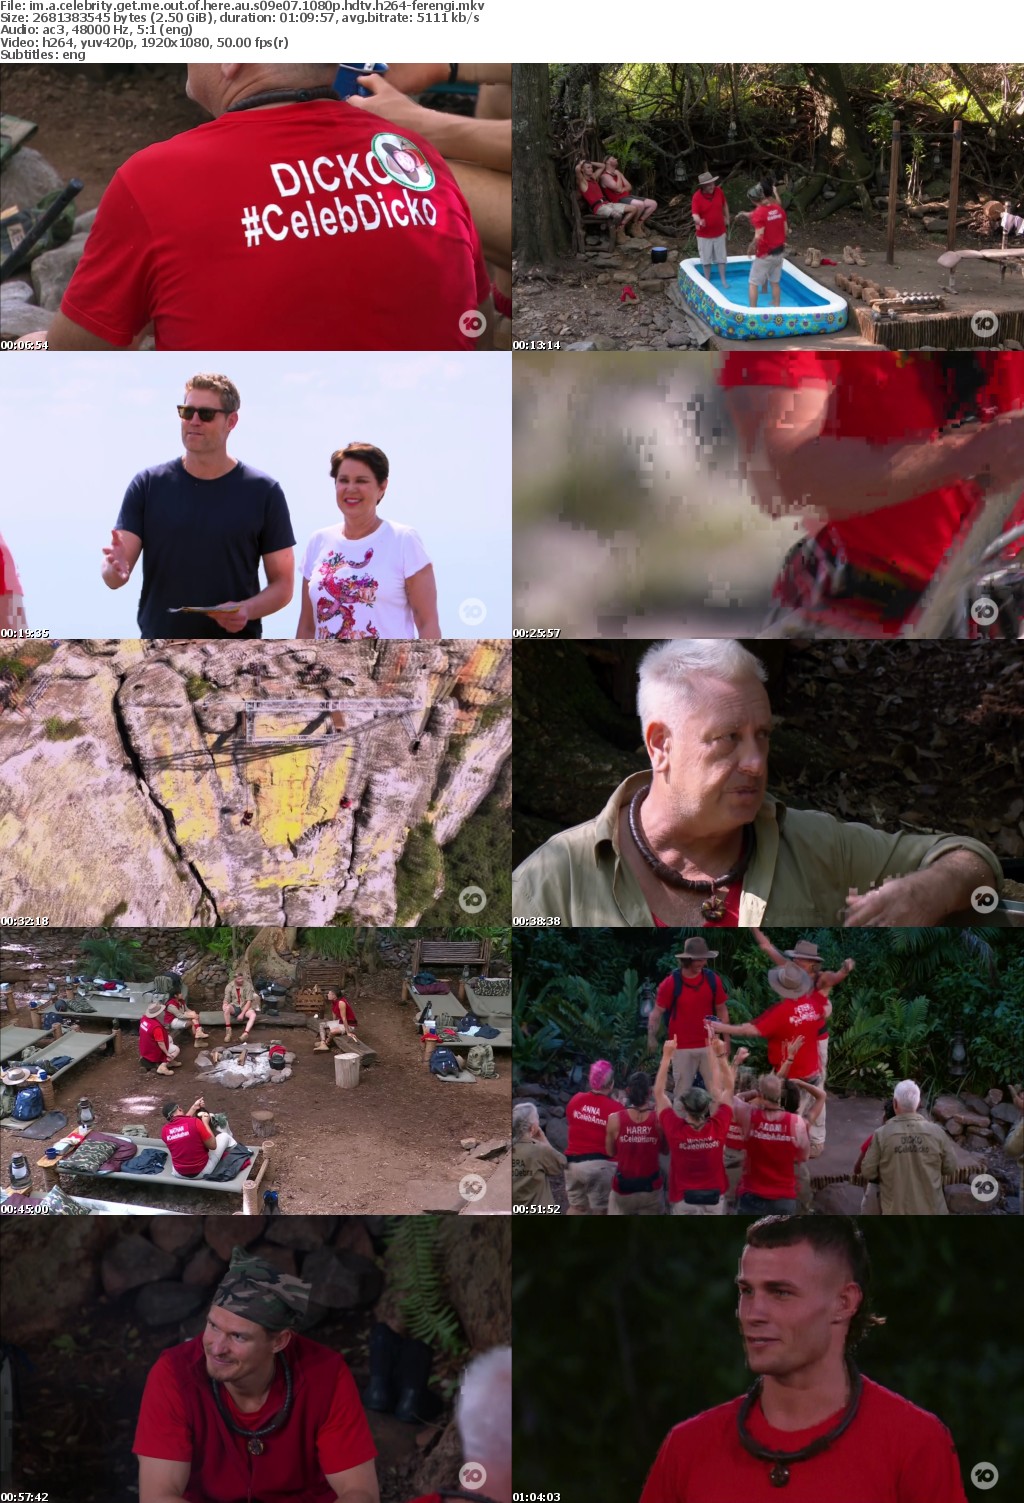 Im A Celebrity Get Me Out of Here AU S09E07 1080p HDTV H264-FERENGI